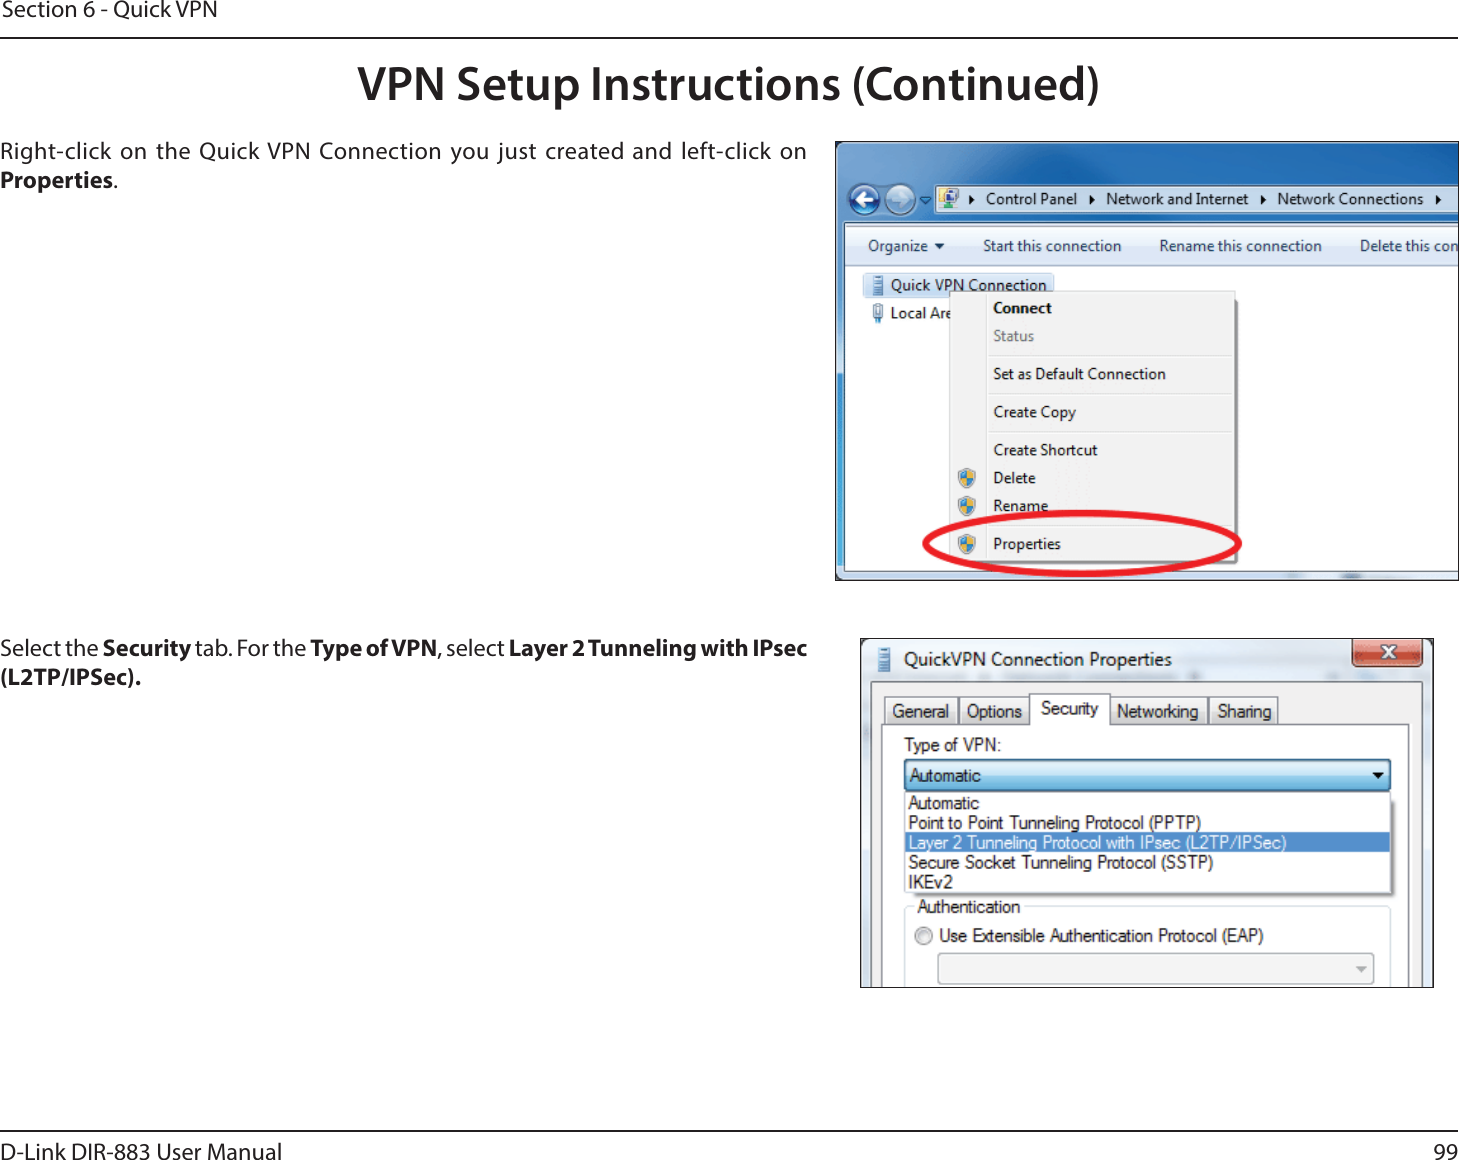 99D-Link DIR-883 User ManualSection 6 - Quick VPNSelect the Security tab. For the Type of VPN, select Layer2Tunneling with IPsec (L2TP/IPSec). Right-click on the Quick VPN Connection you just created and left-click on Properties.VPN Setup Instructions (Continued)